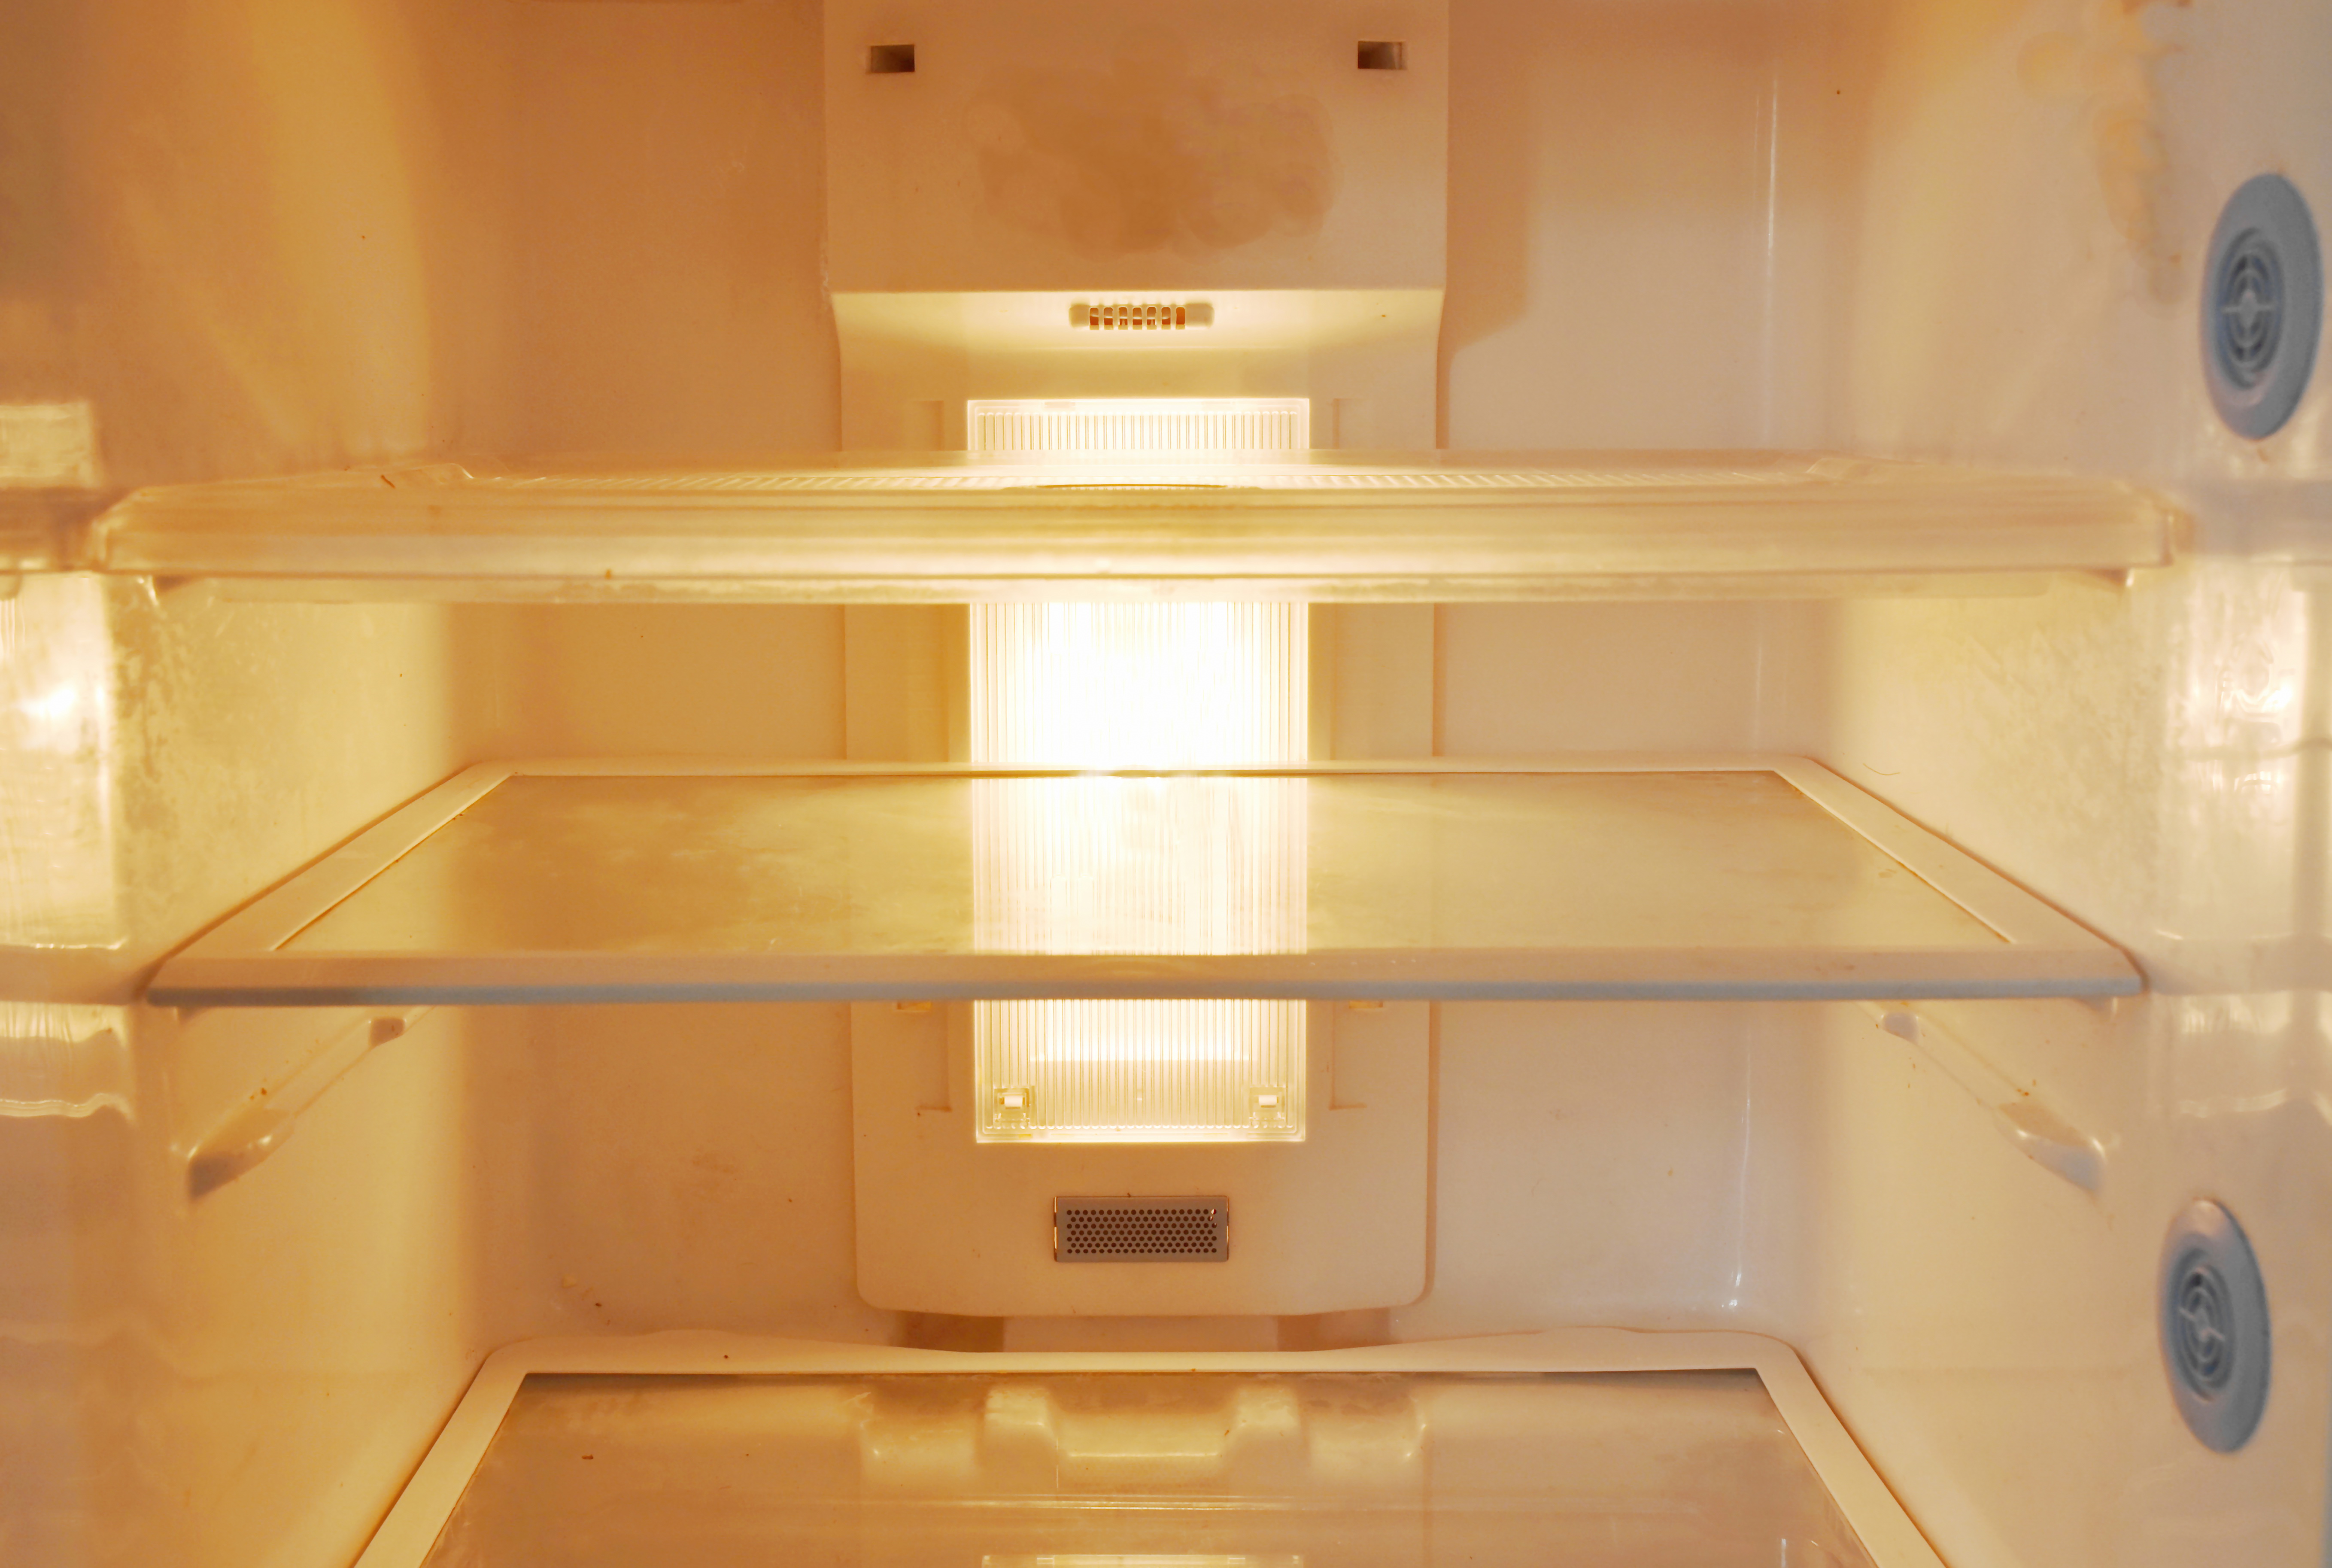 What Kind of Light Bulb Do You Need for the Fridge? Here's What to